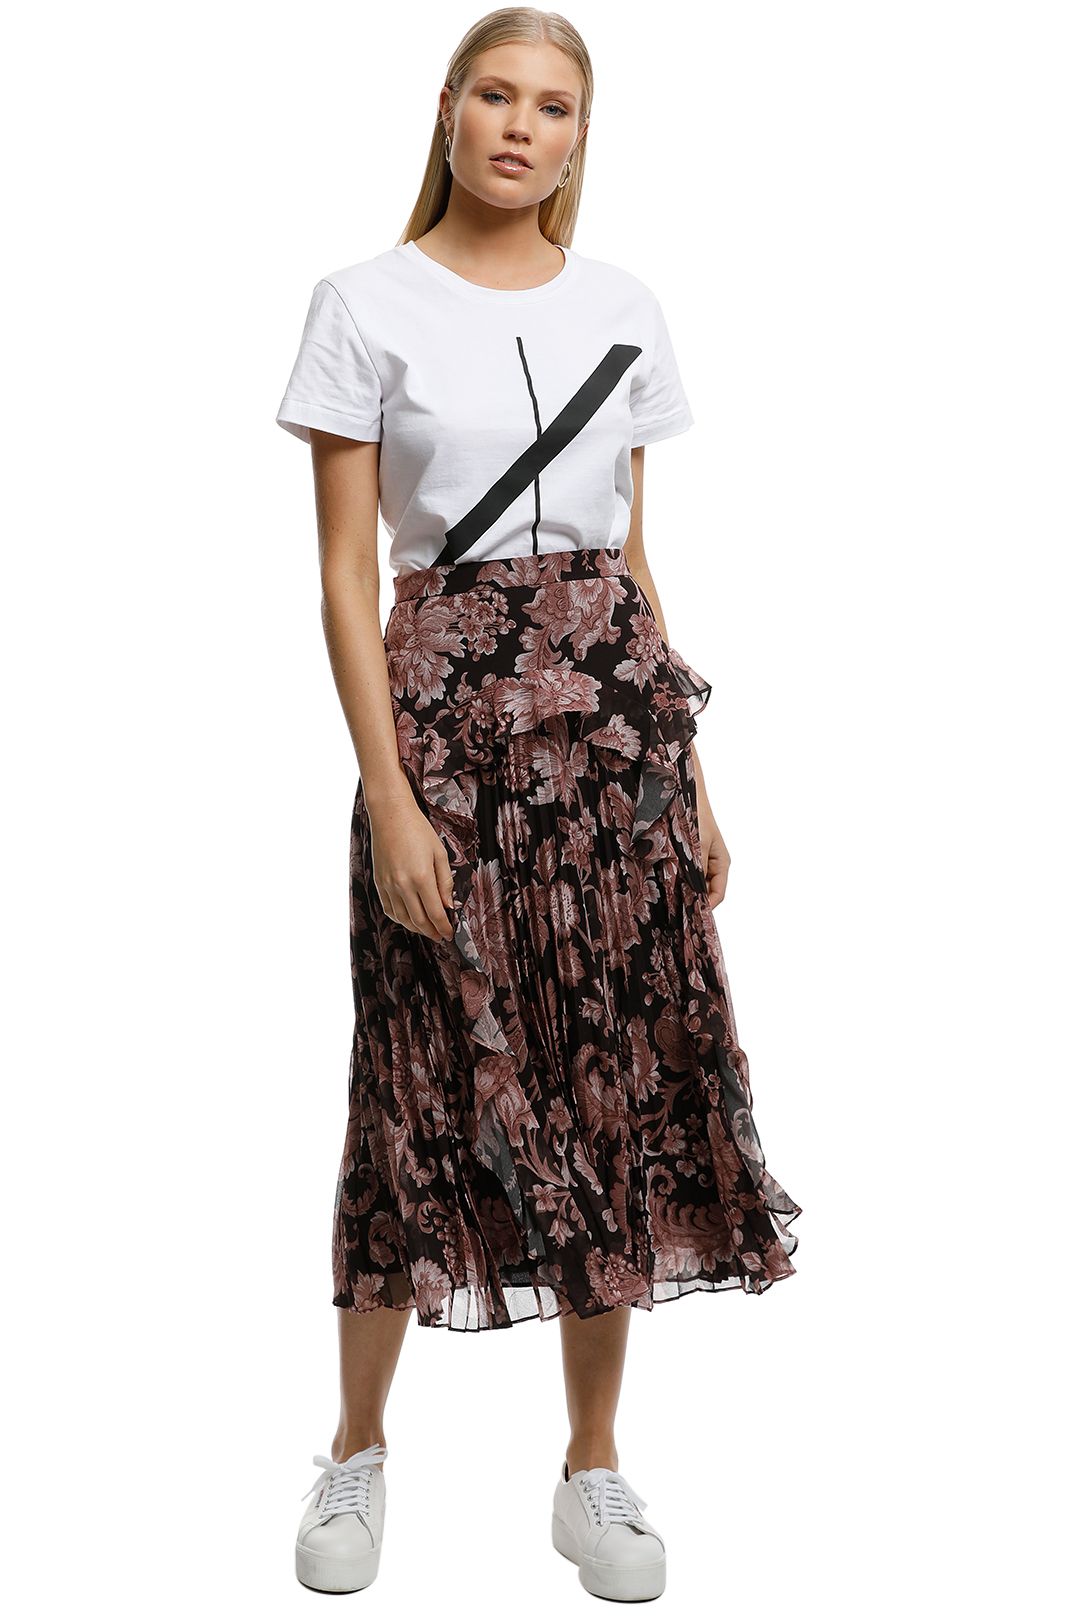 Lover-Florence-Pleat-Midi-Skirt-Cocoa-Front